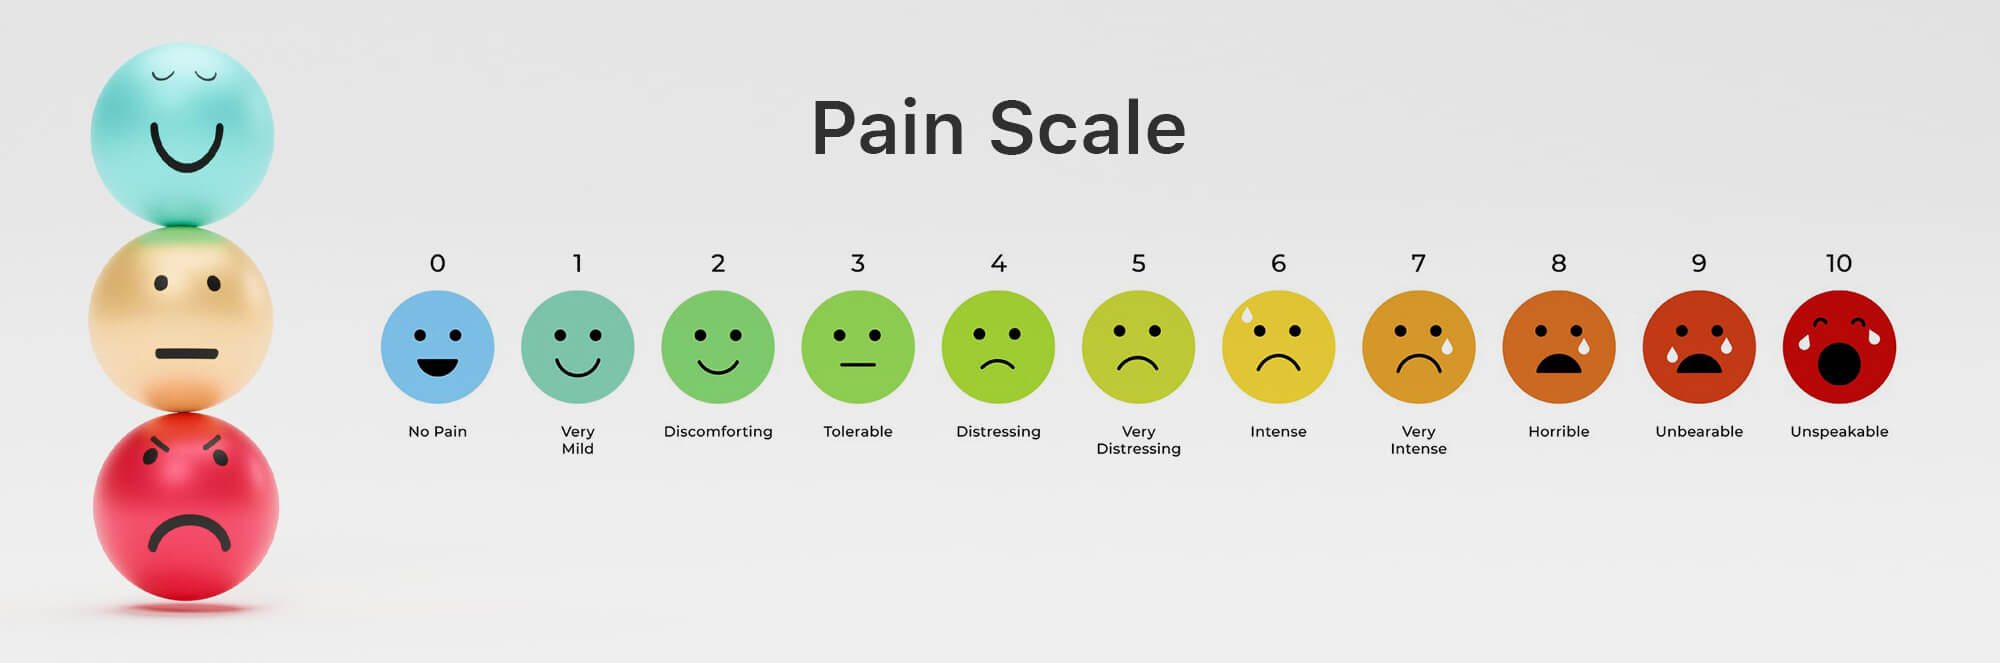 identifying pain points - i4T Global